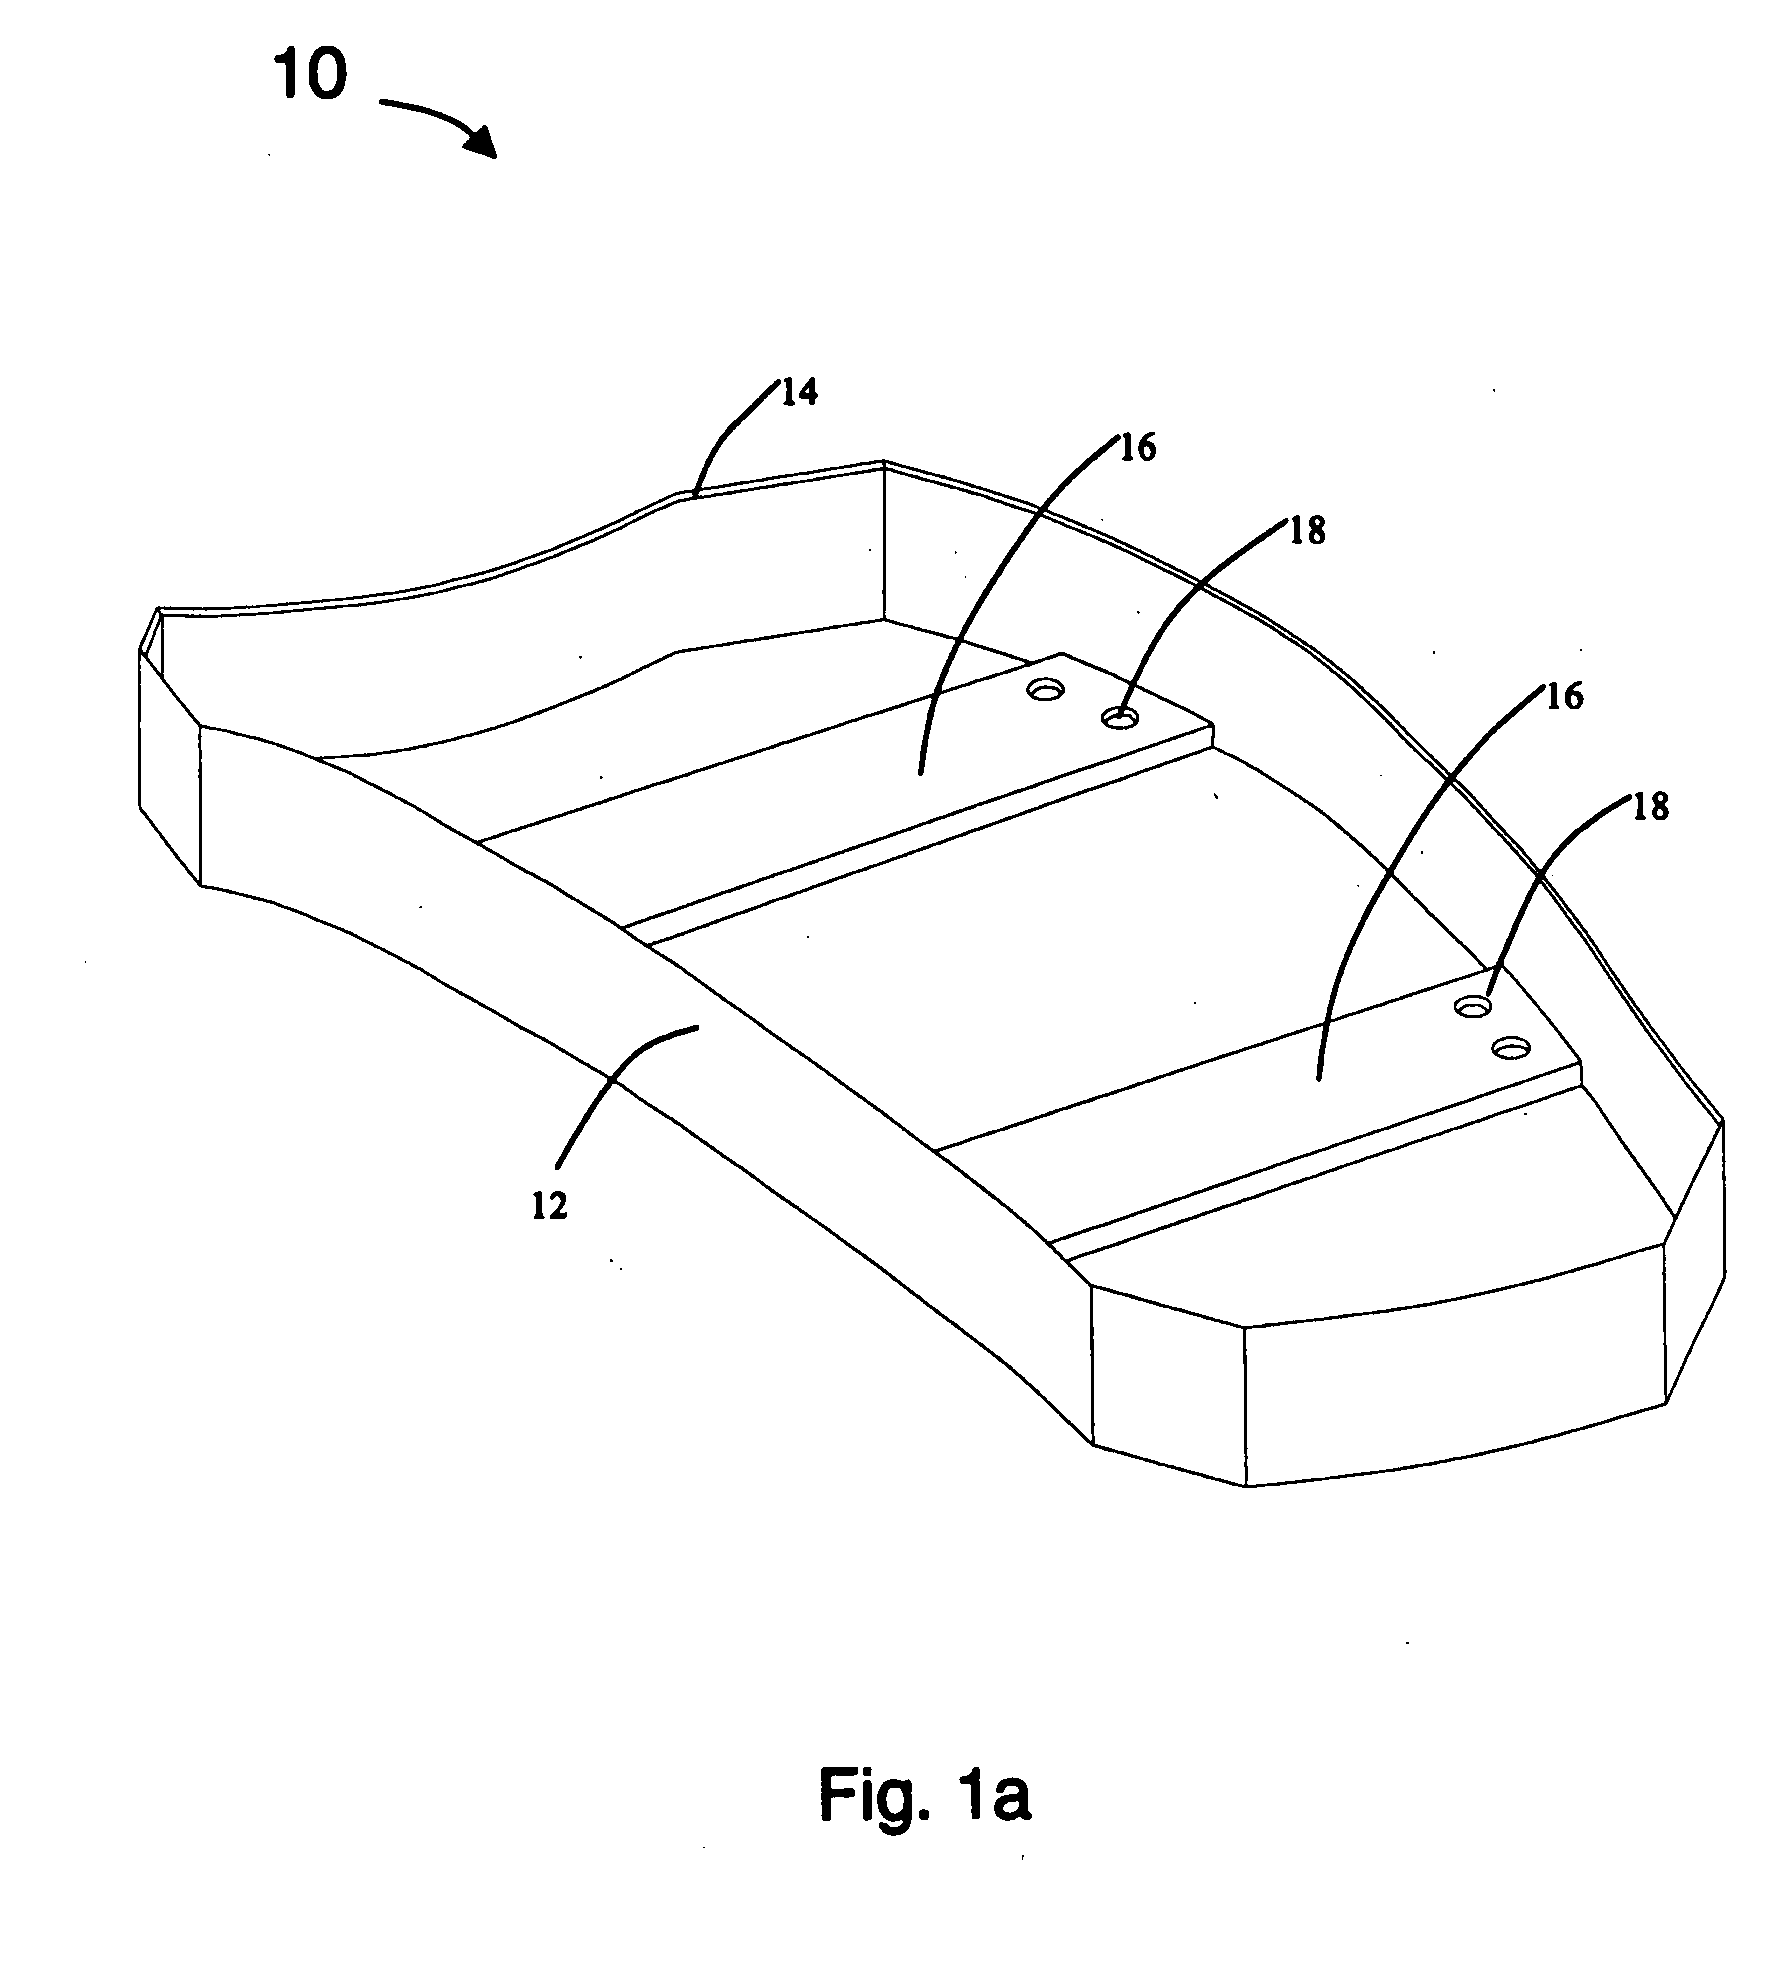 System and method for bending strip material to create cutting dies